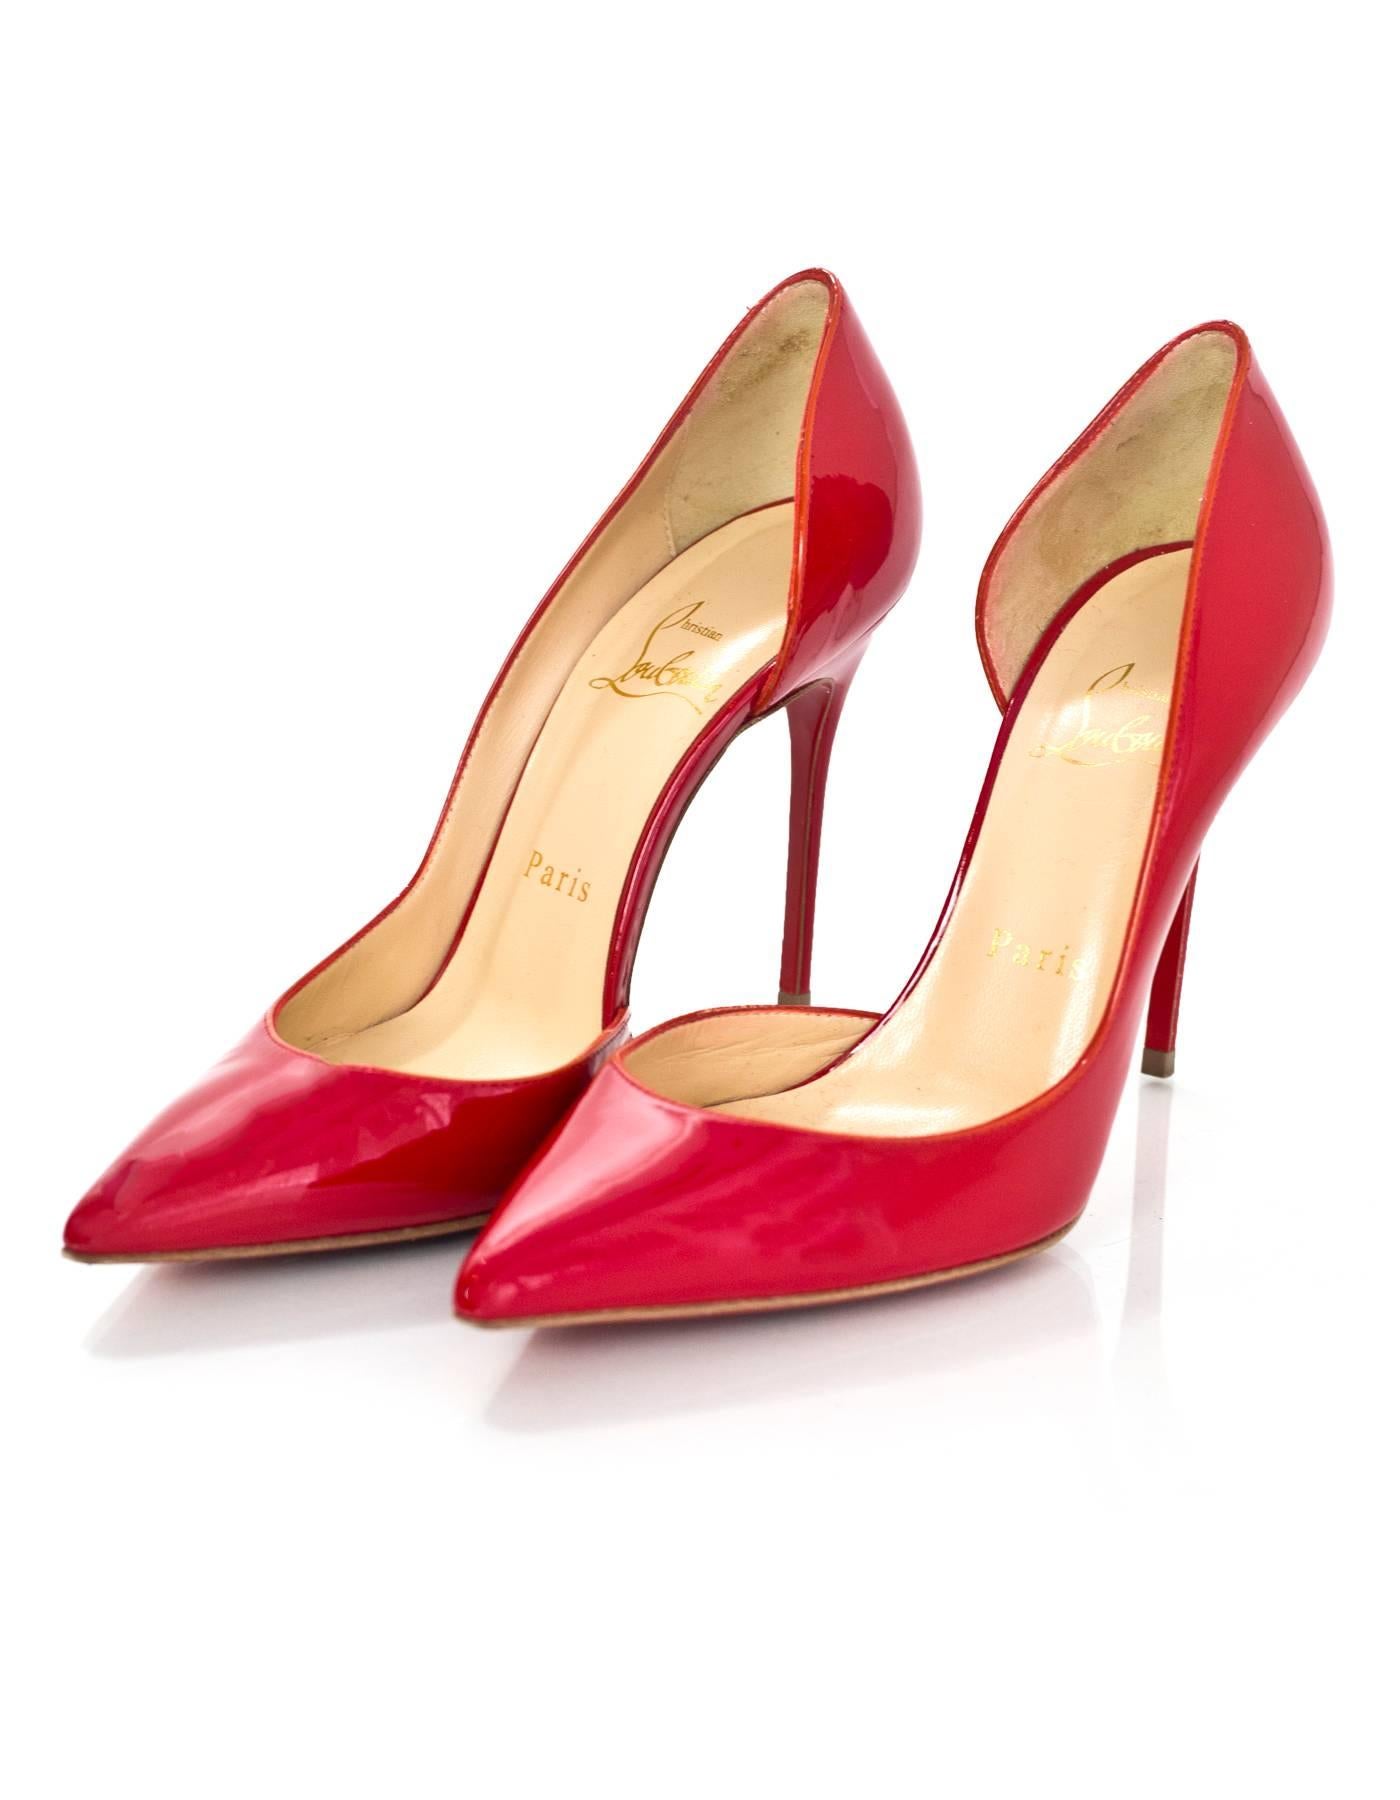 Christian Louboutin Red Patent Iriza d'Orsay Pumps Sz 36

Made In: Italy
Color: Red
Materials: Patent leather
Closure/Opening: Slide on
Sole Stamp: Christian Louboutin Made in Italy 36
Overall Condition: Excellent pre-owned condition with the